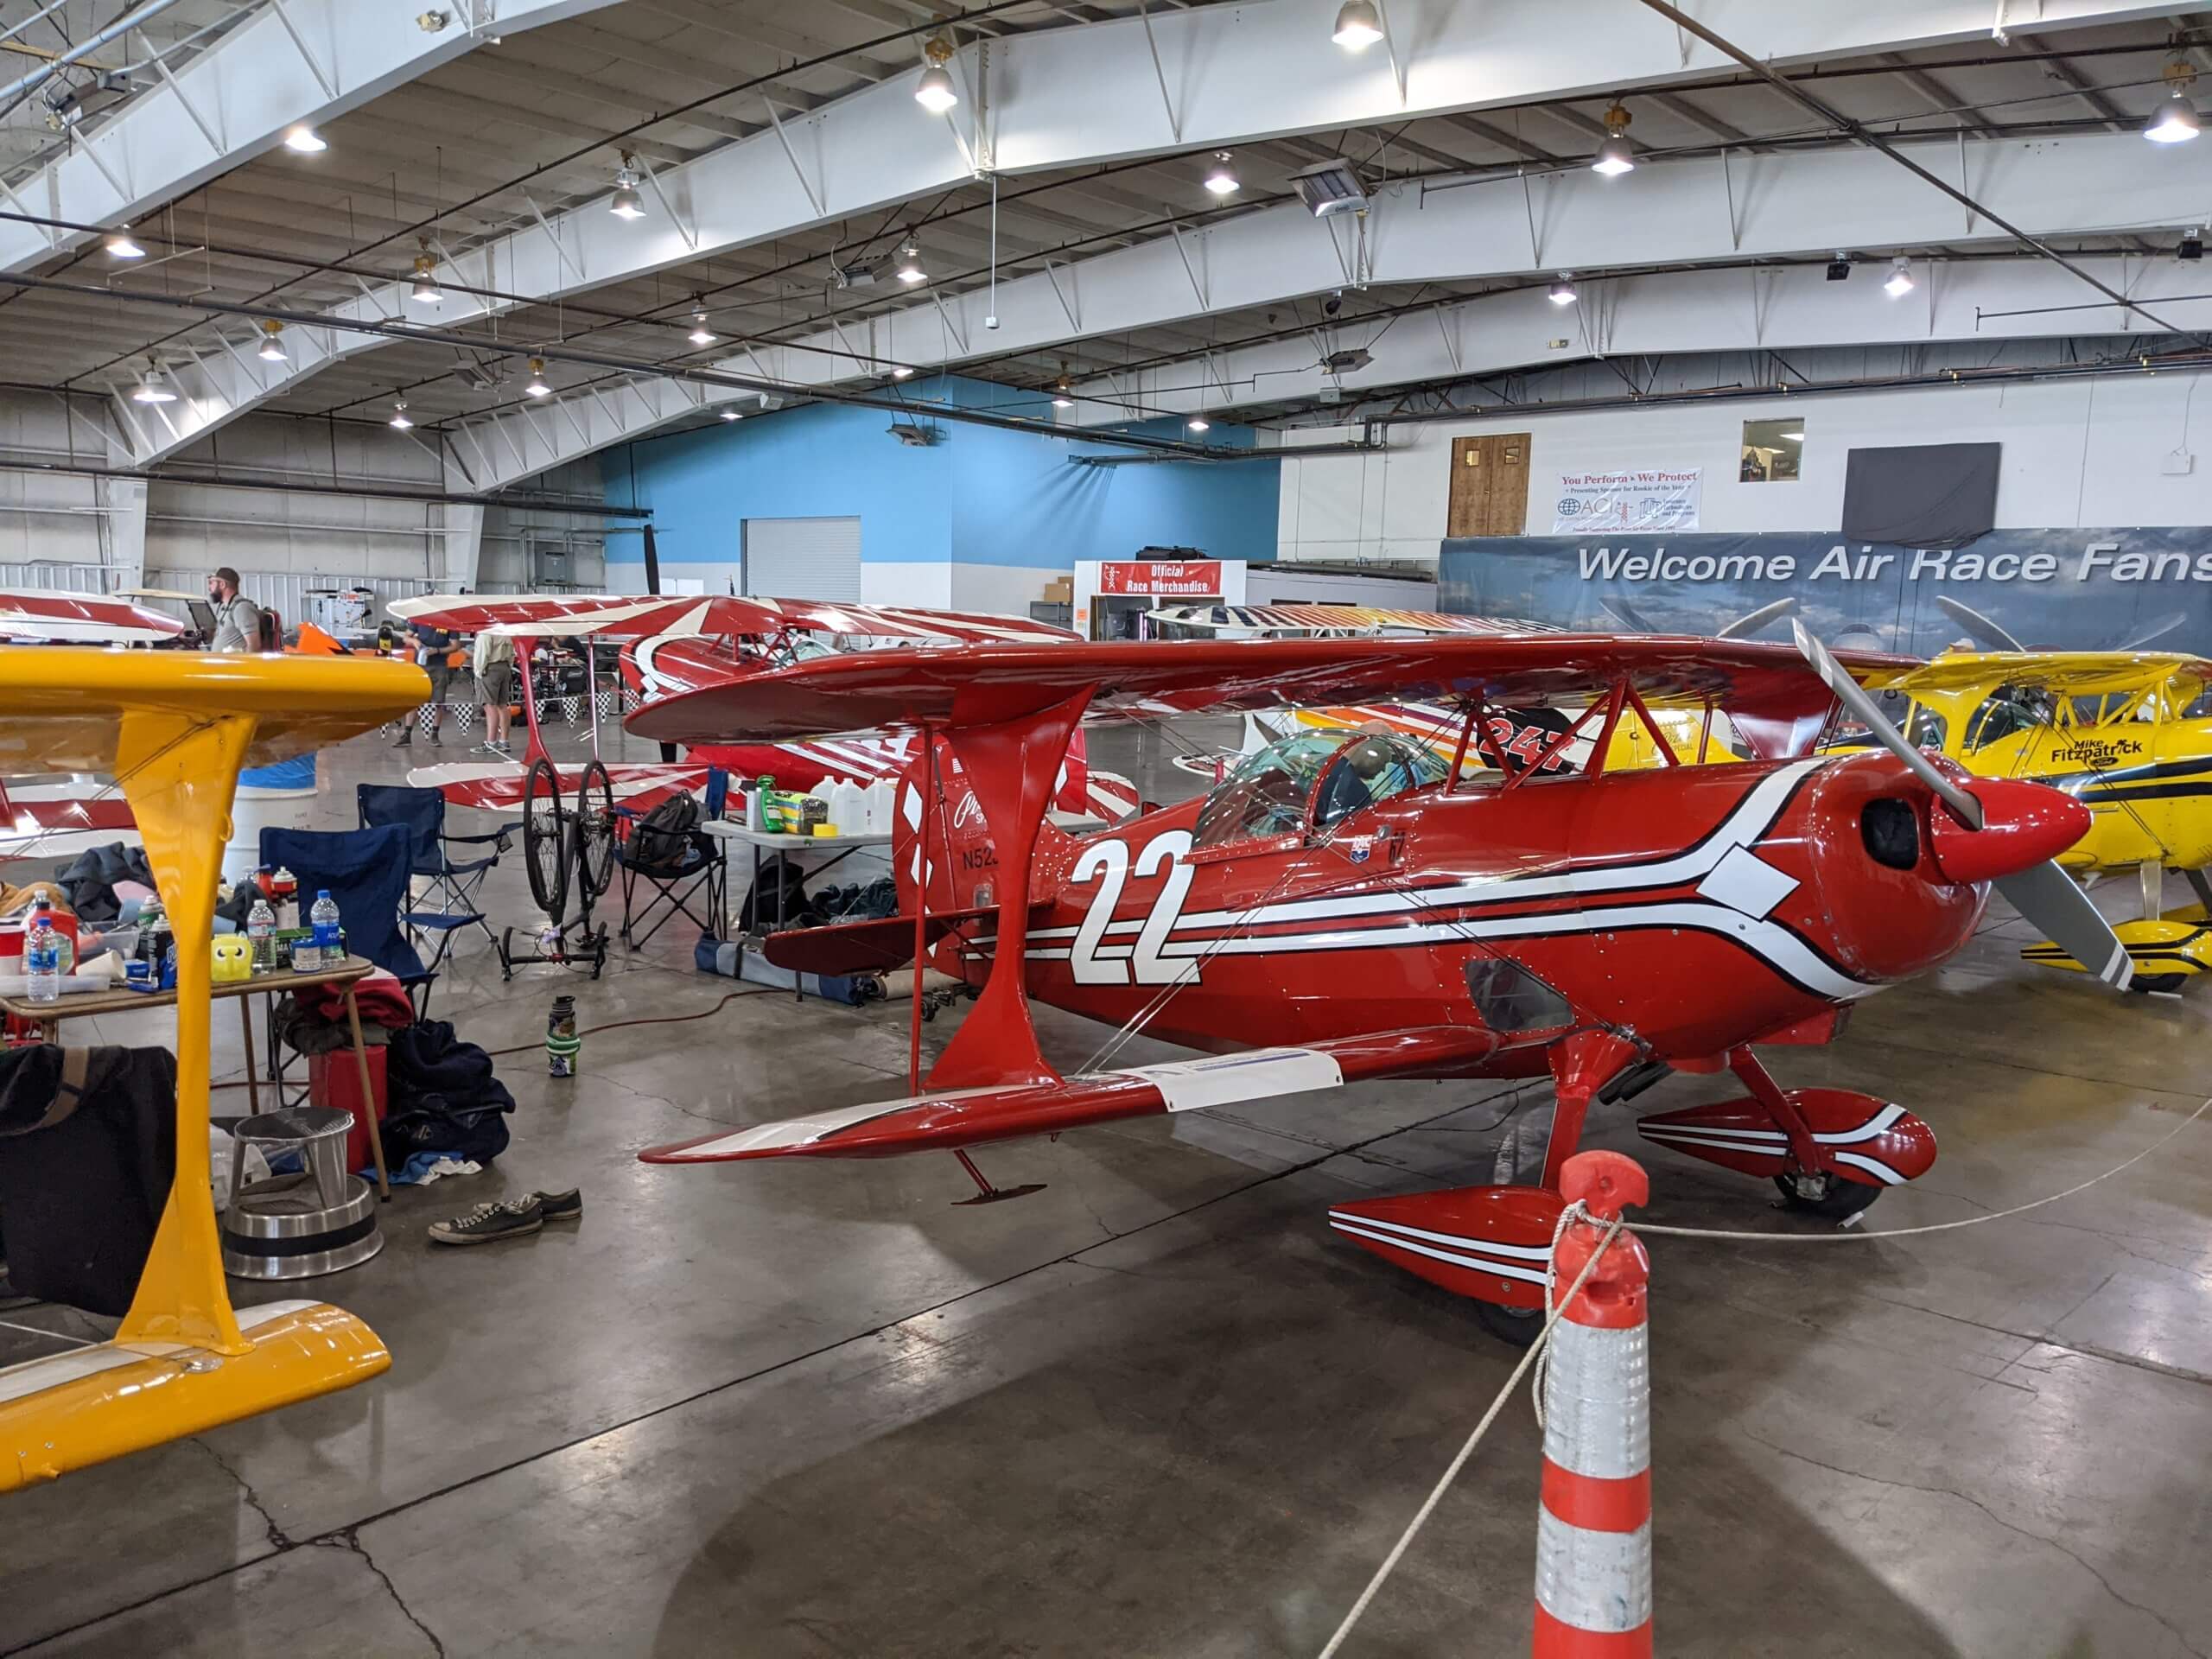 A row of Pitts Special biplanes in the hangar between races